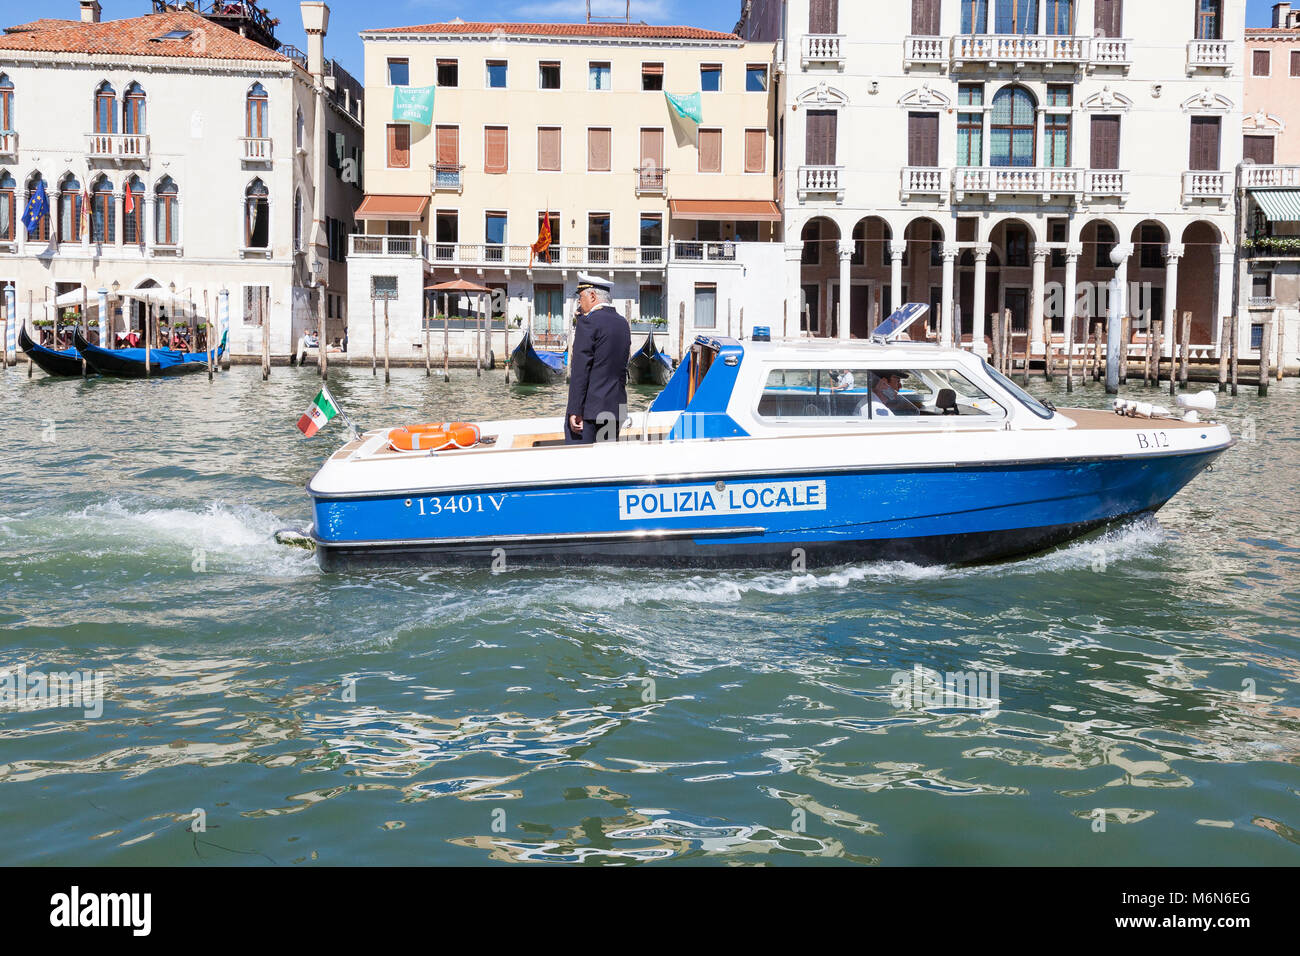 Polizia Locale boat on the Grand Canal, Venice, Veneto, Italy with two local Italian police officers on patrol in Cannaregio Stock Photo